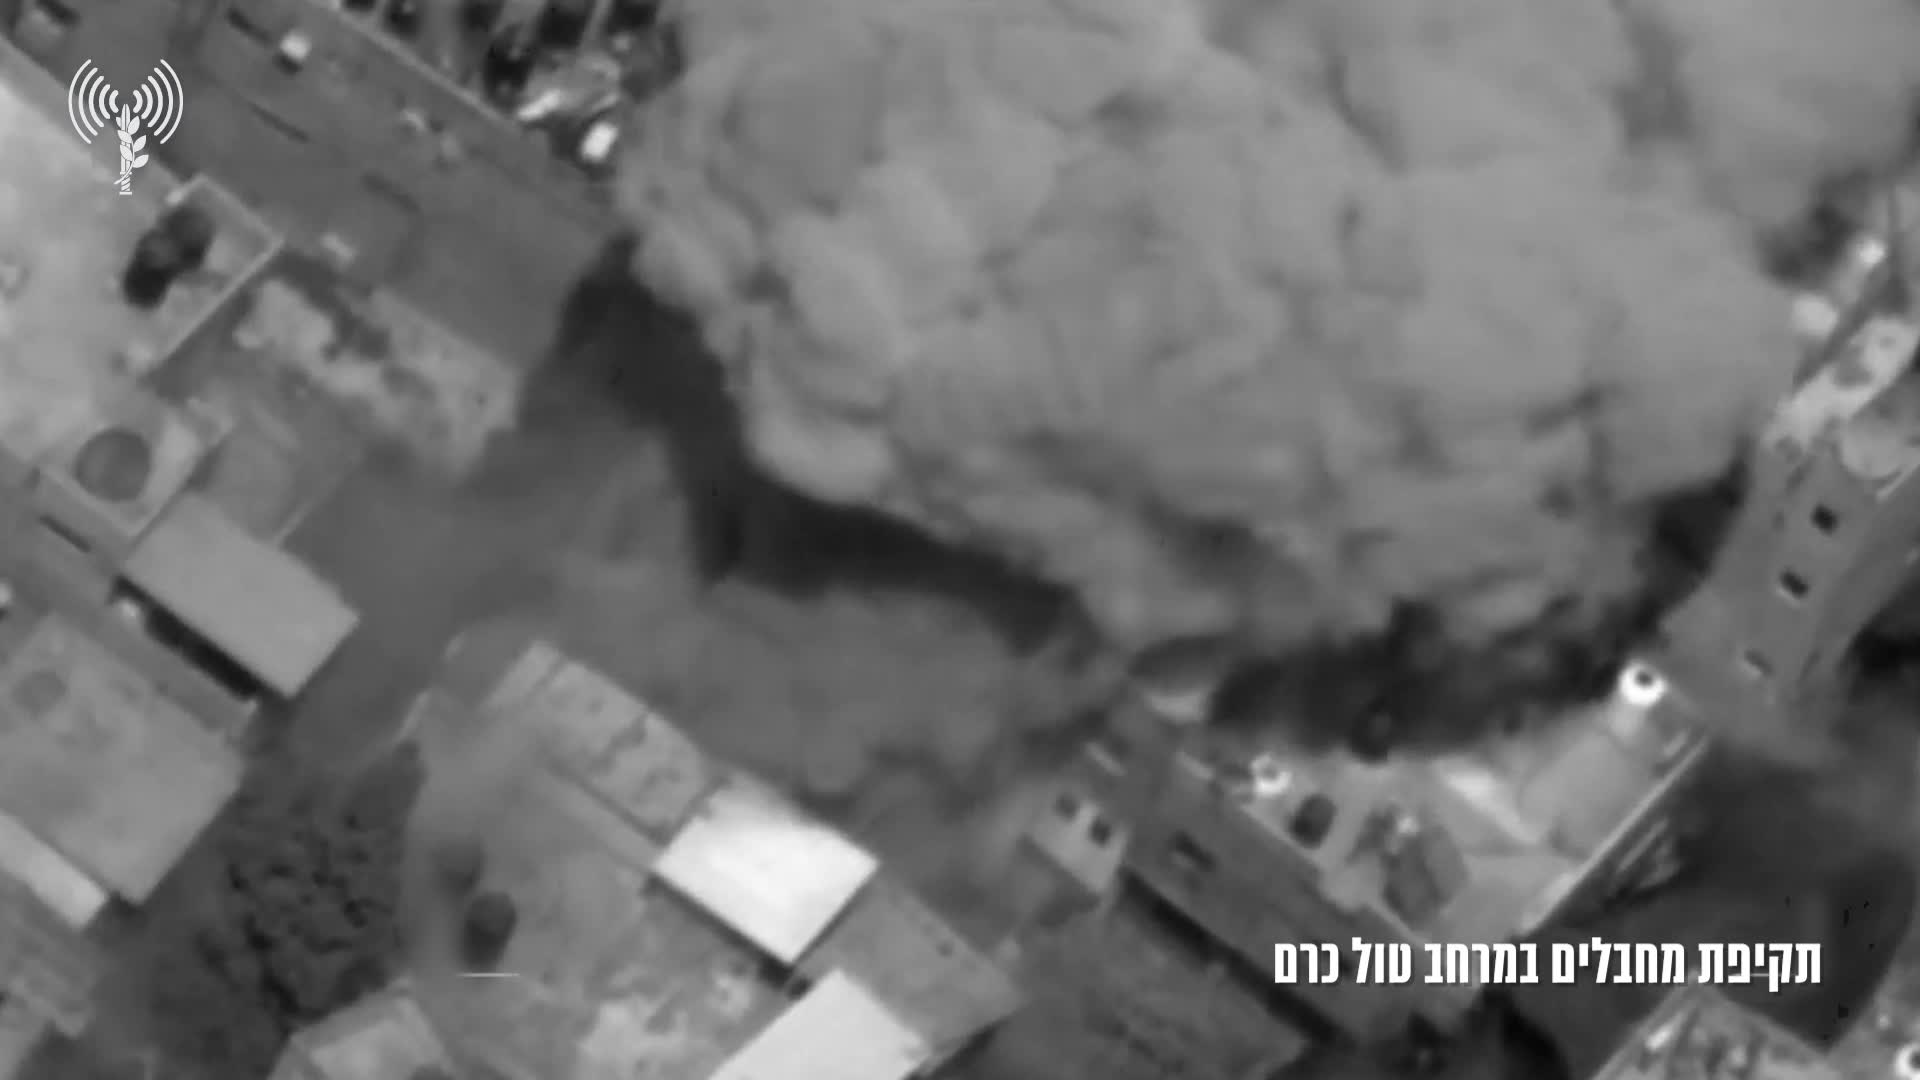 The Israeli army confirms carrying out an airstrike in the Nur Shams camp in the Tulkarem area of the West Bank earlier today, killing a Palestinian Islamic Jihad commander. According to the Israeli army and Shin Bet, Saeed Jaber was responsible for several shooting and explosive device attacks against troops and civilians